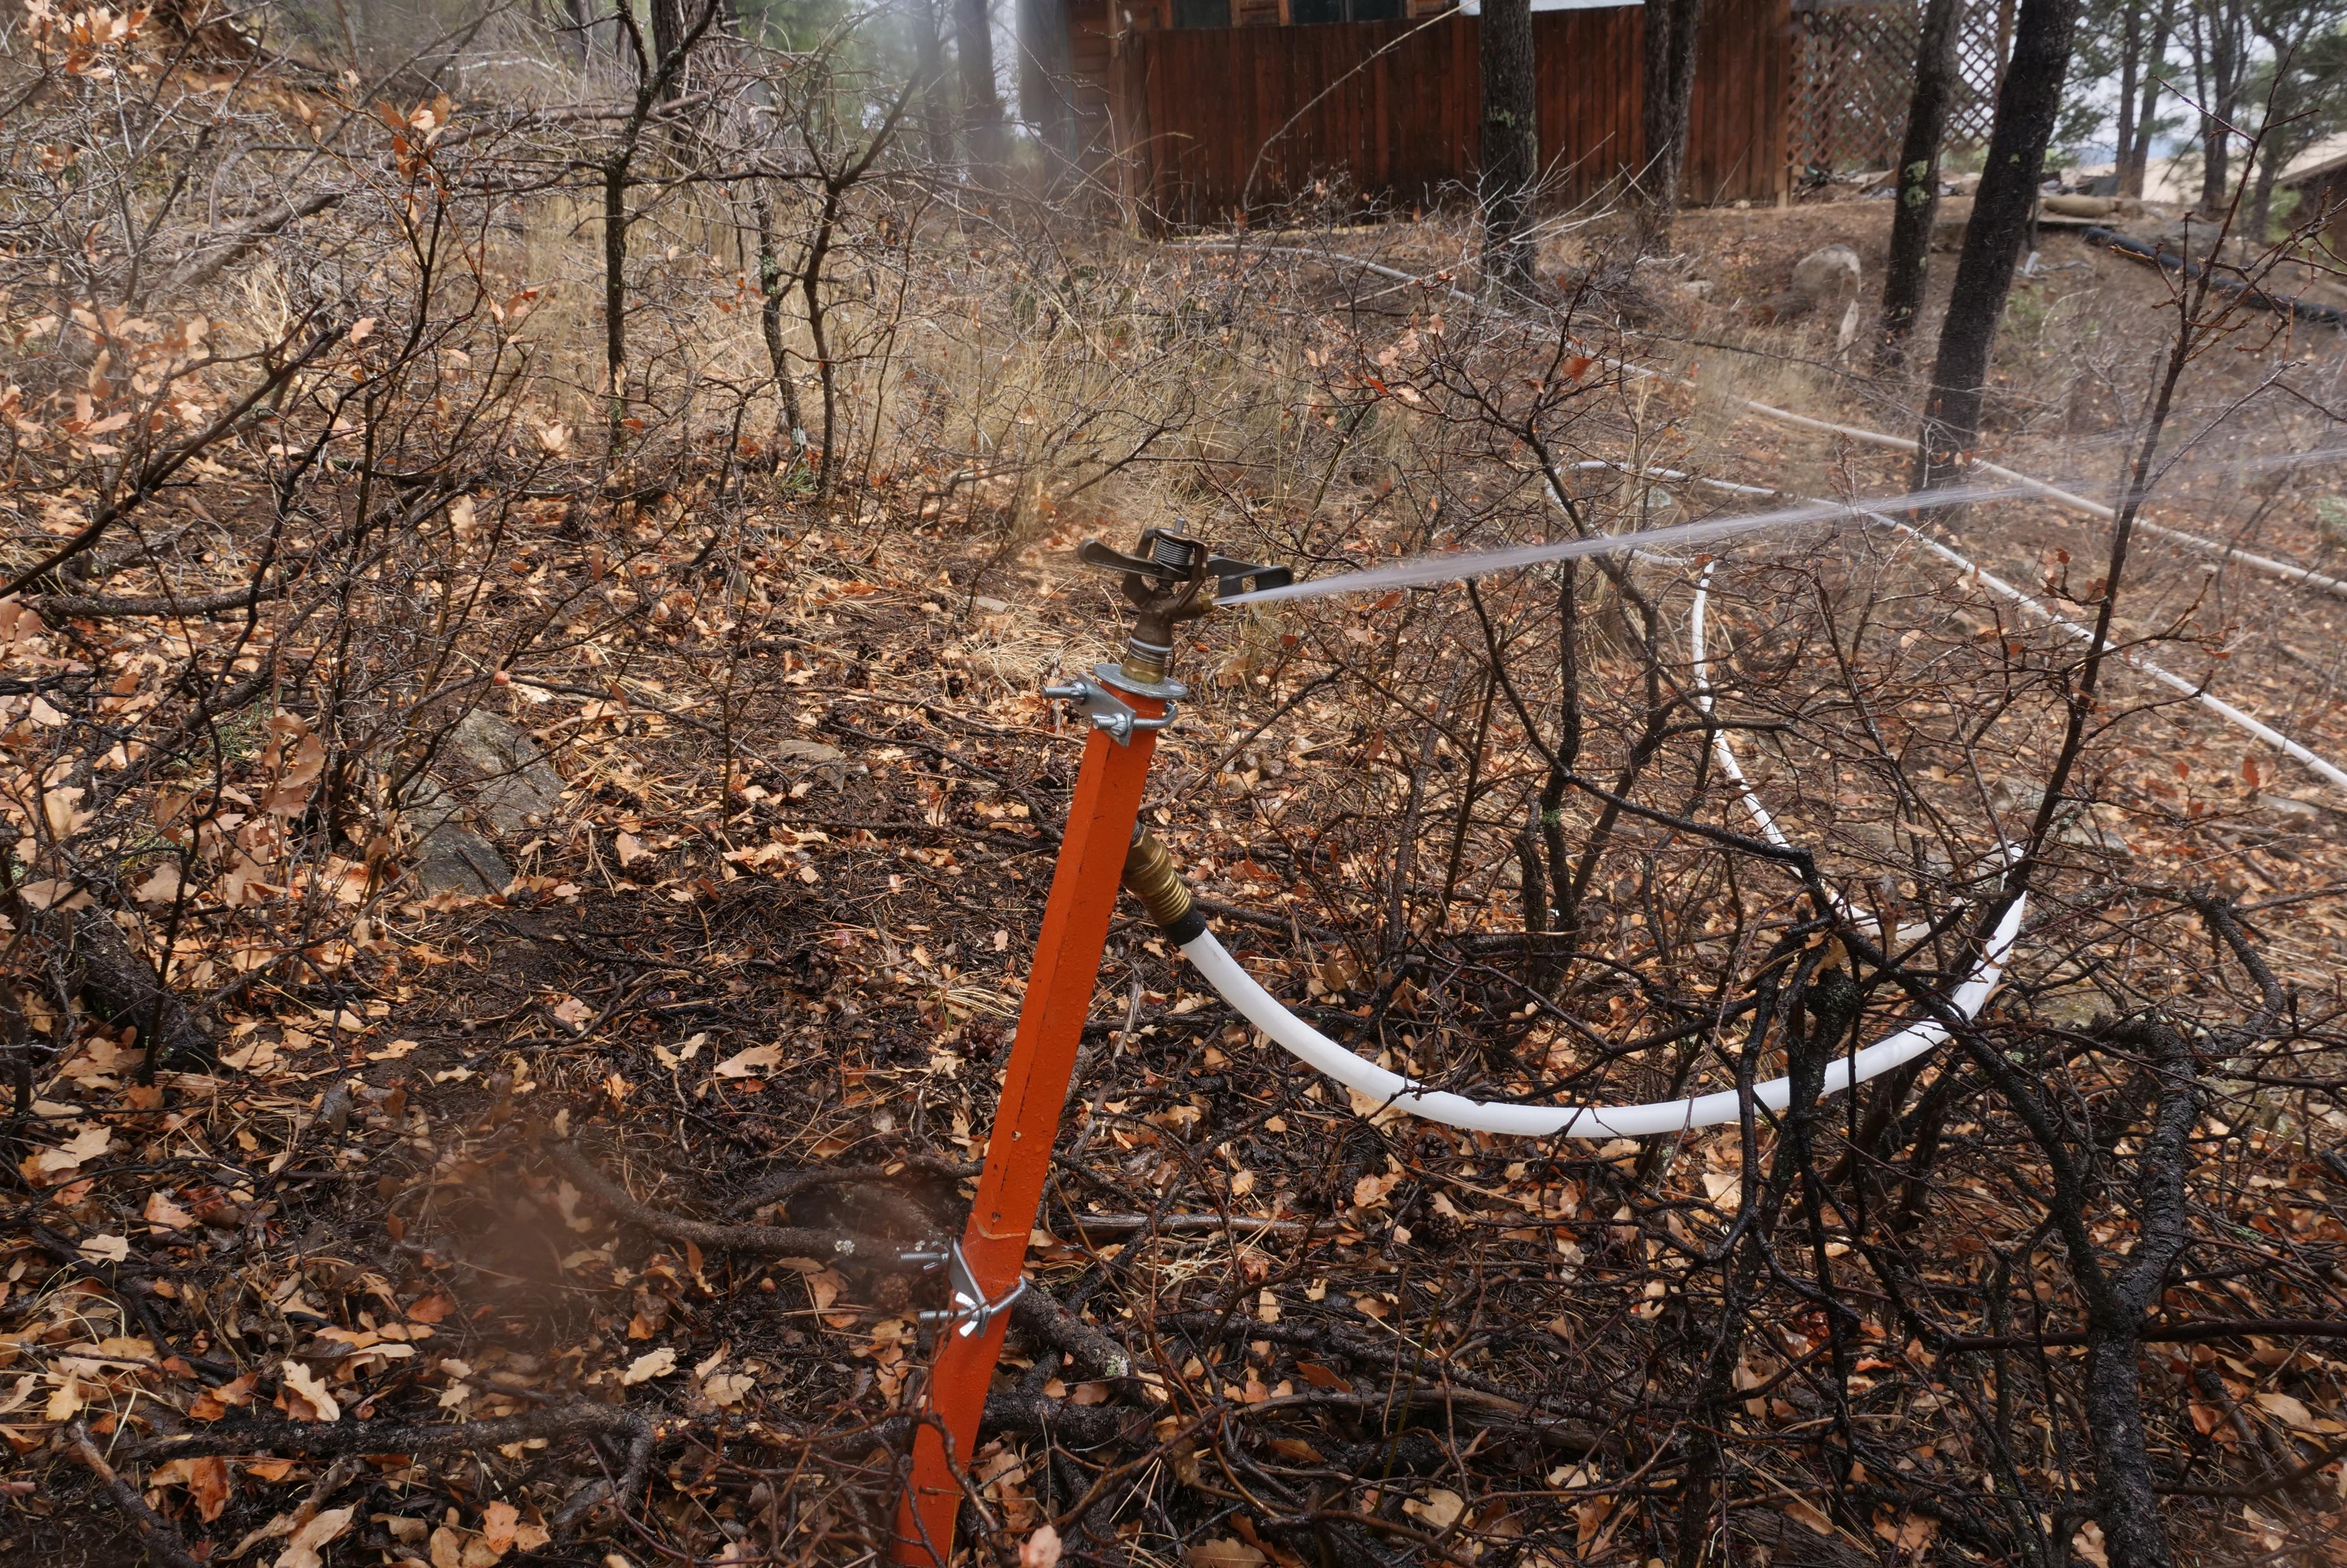 Sprinklers, powered by portable pumps and supplied by portable water tanks, are set up around many homes threatened by the fire.